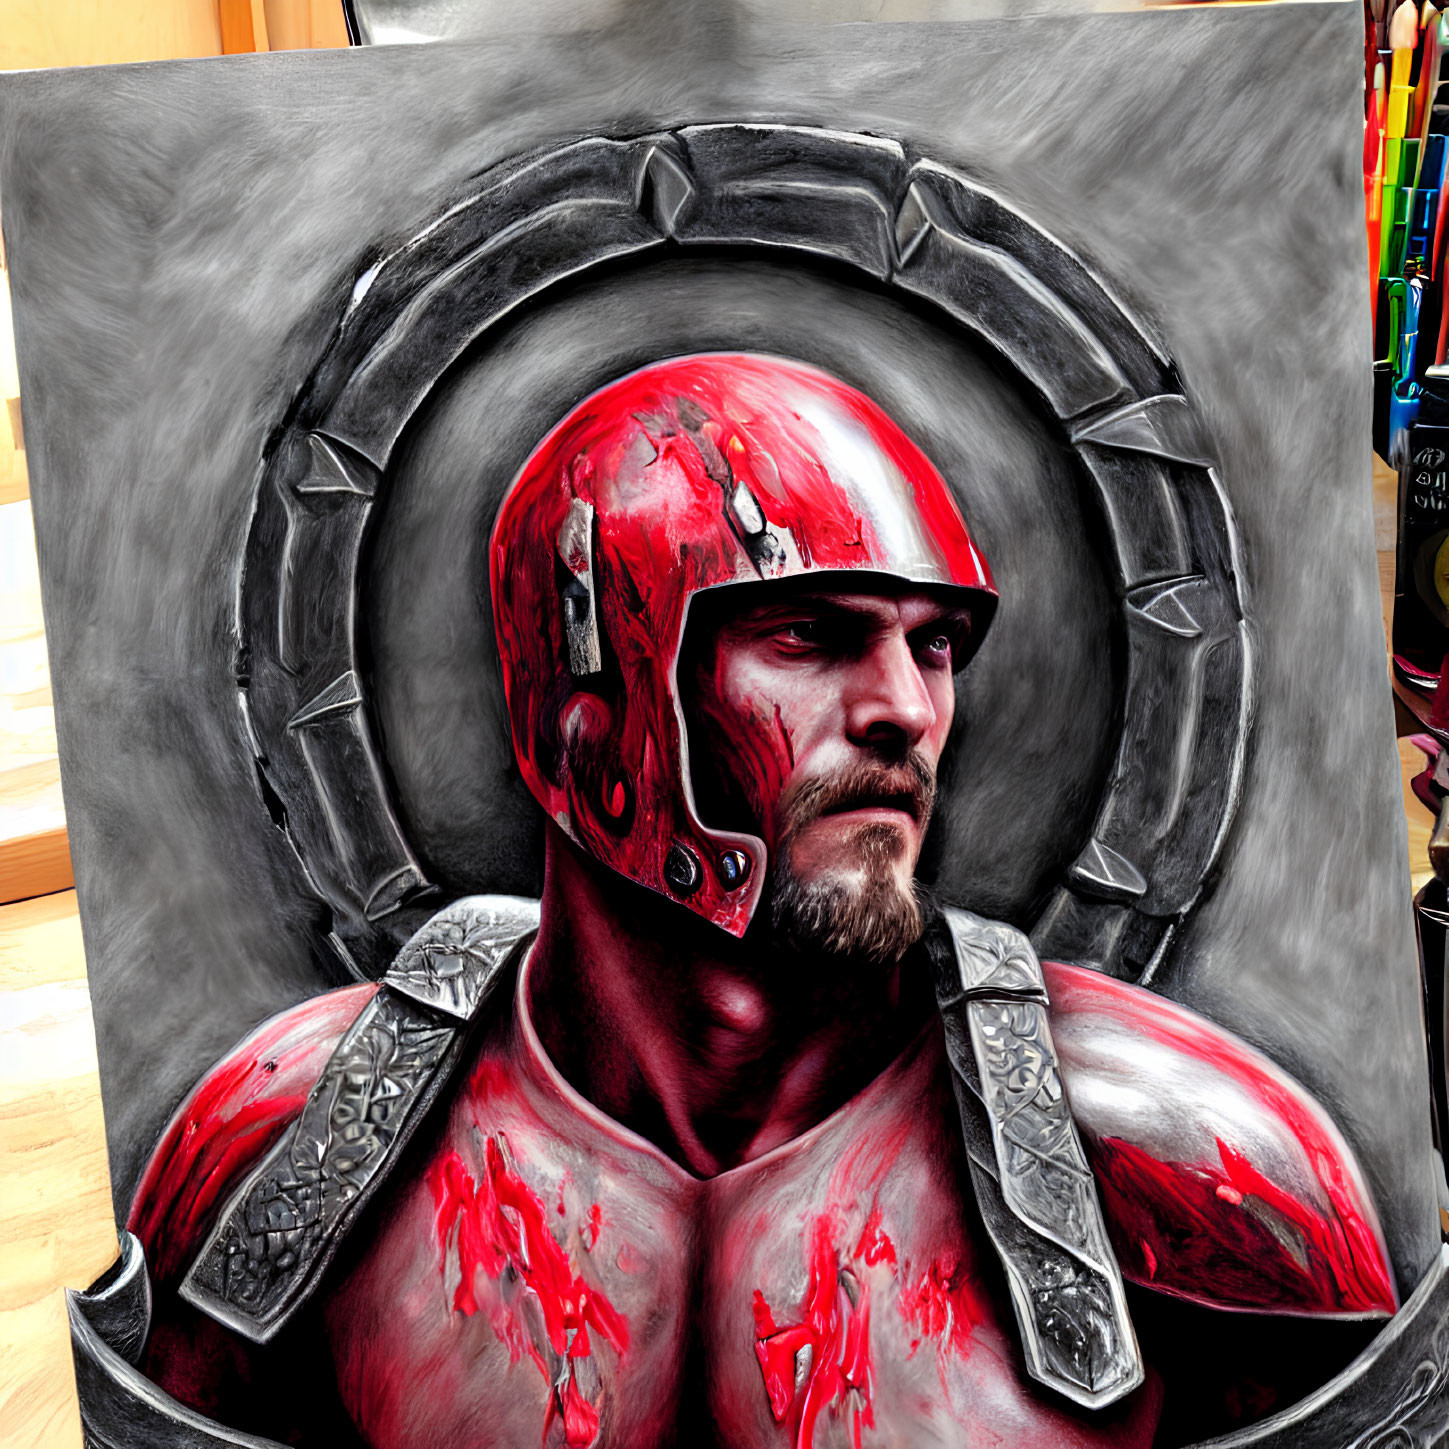 Bearded warrior in red armor with bloodstains on metal backdrop